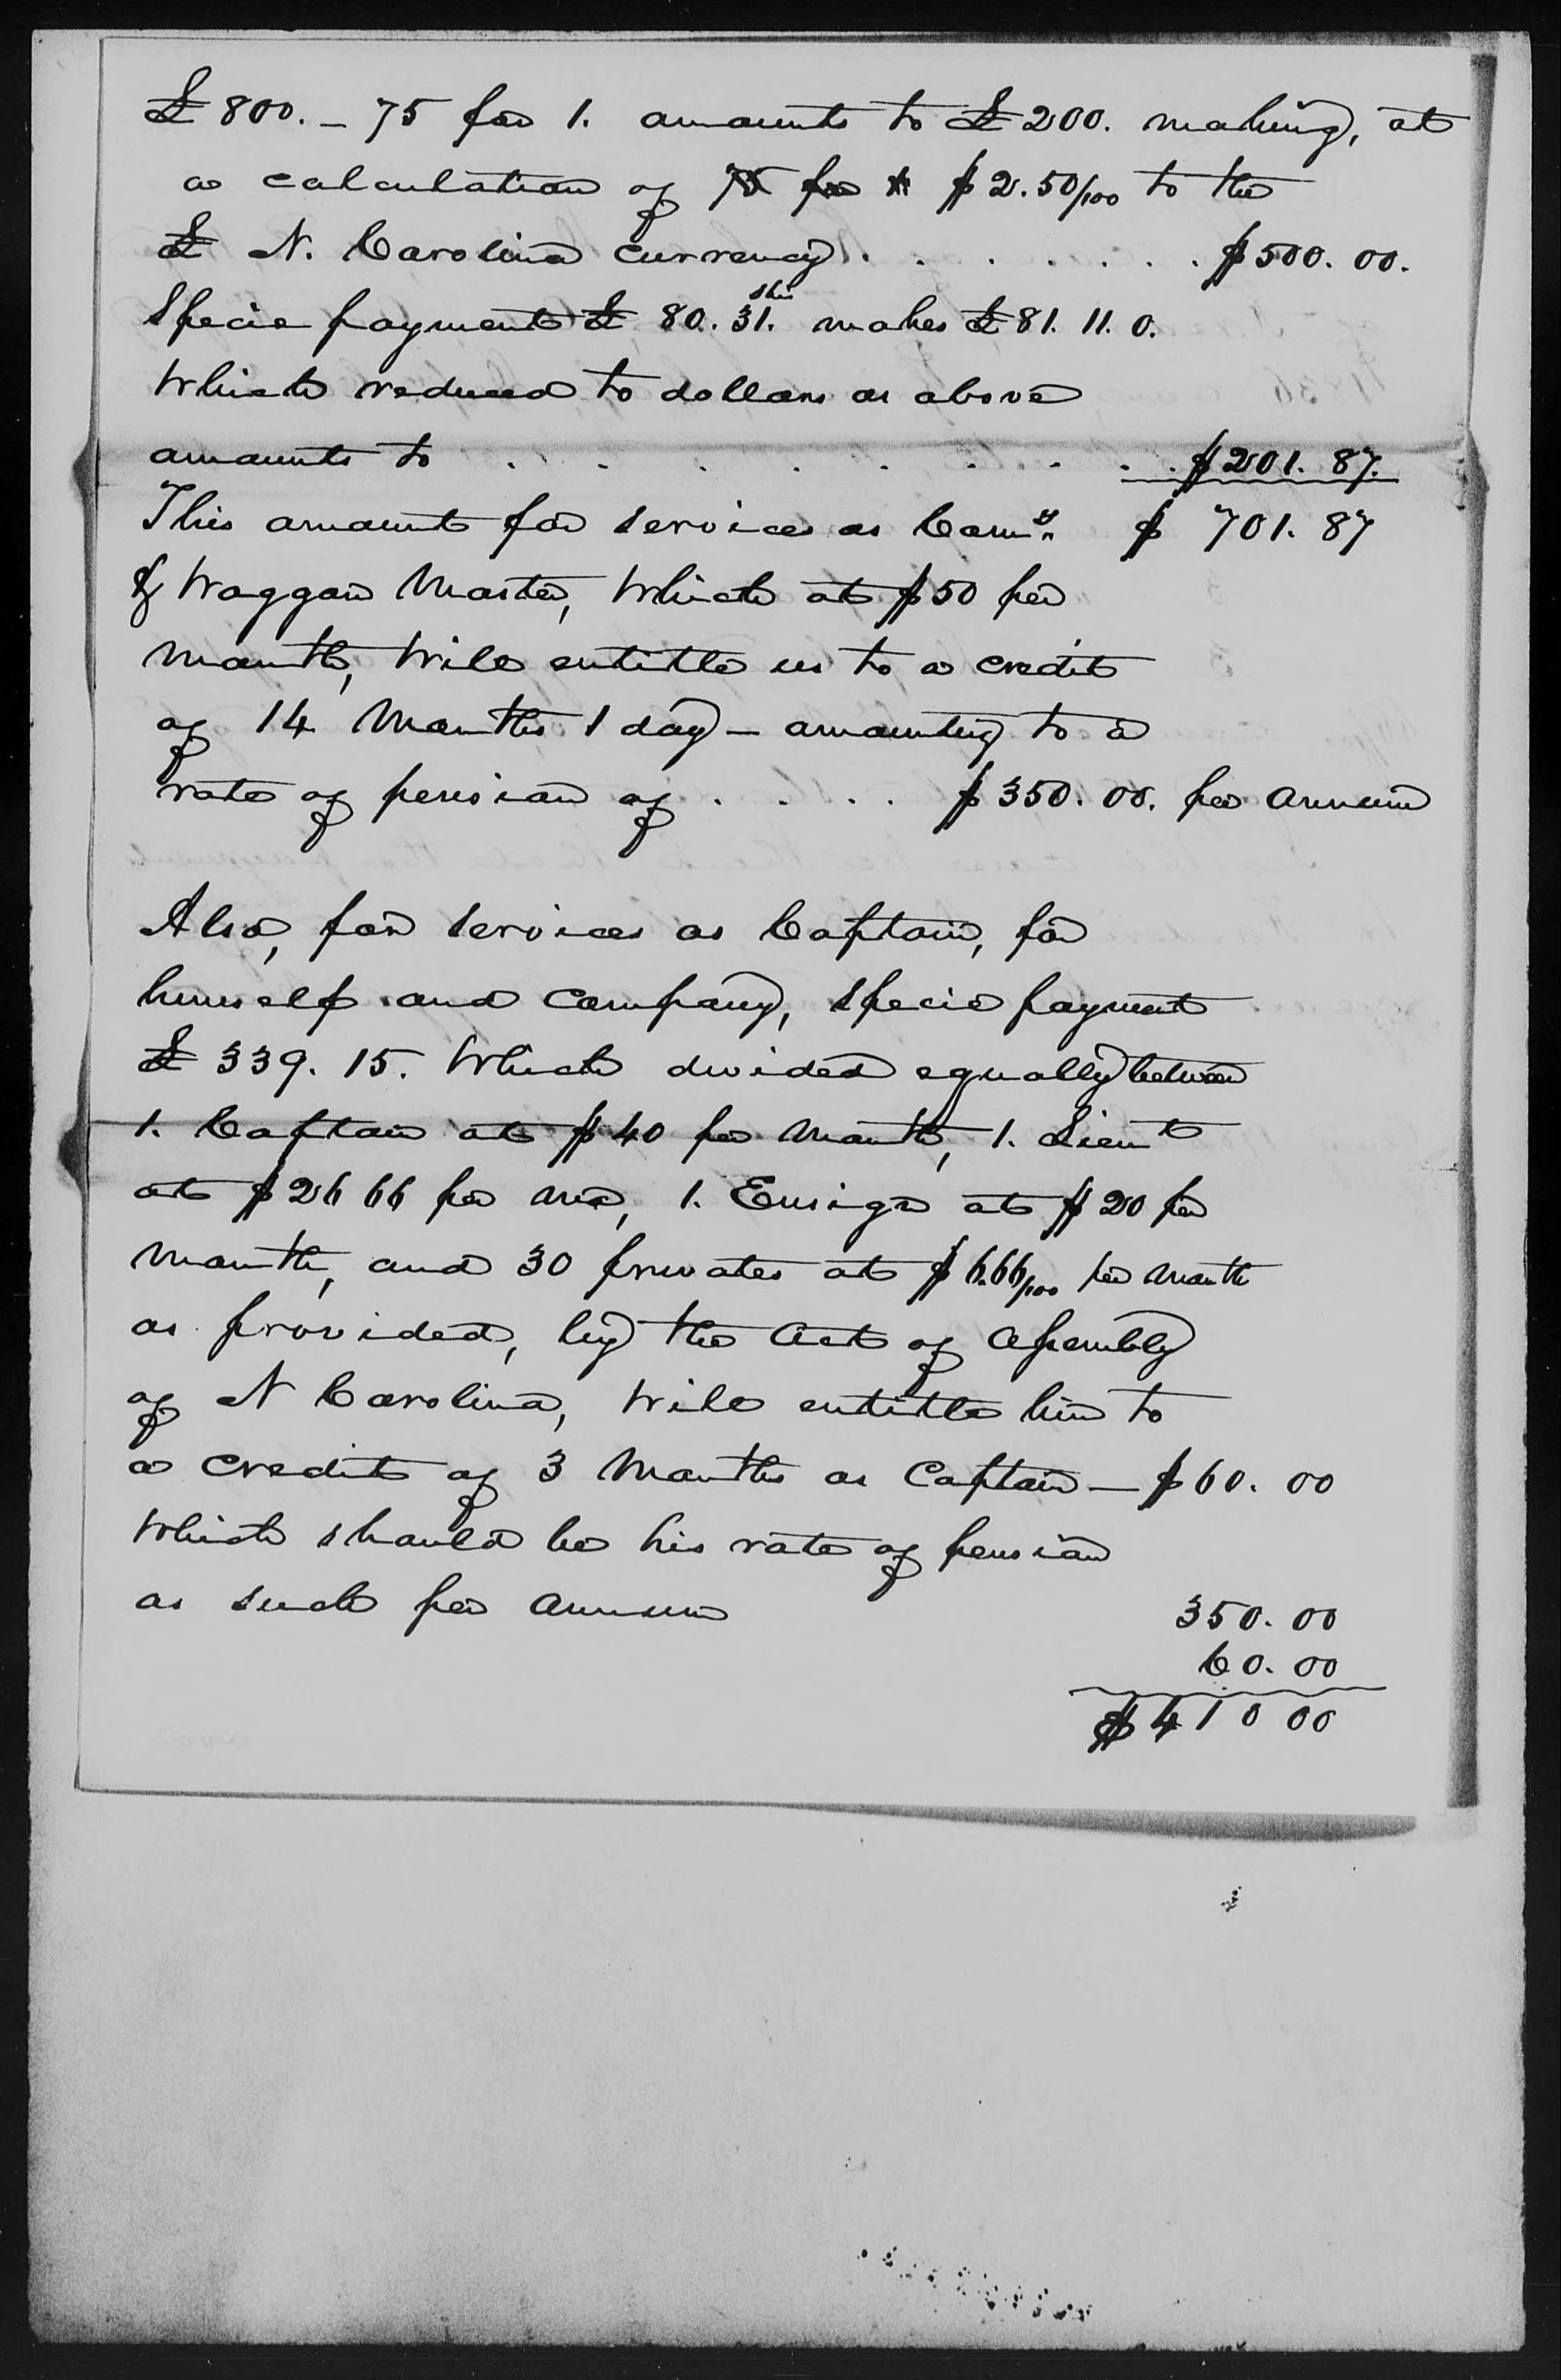 Report of the Pension of Rachel Debow from H. S. Evans to James Ewell Heath, circa 1851, page 2